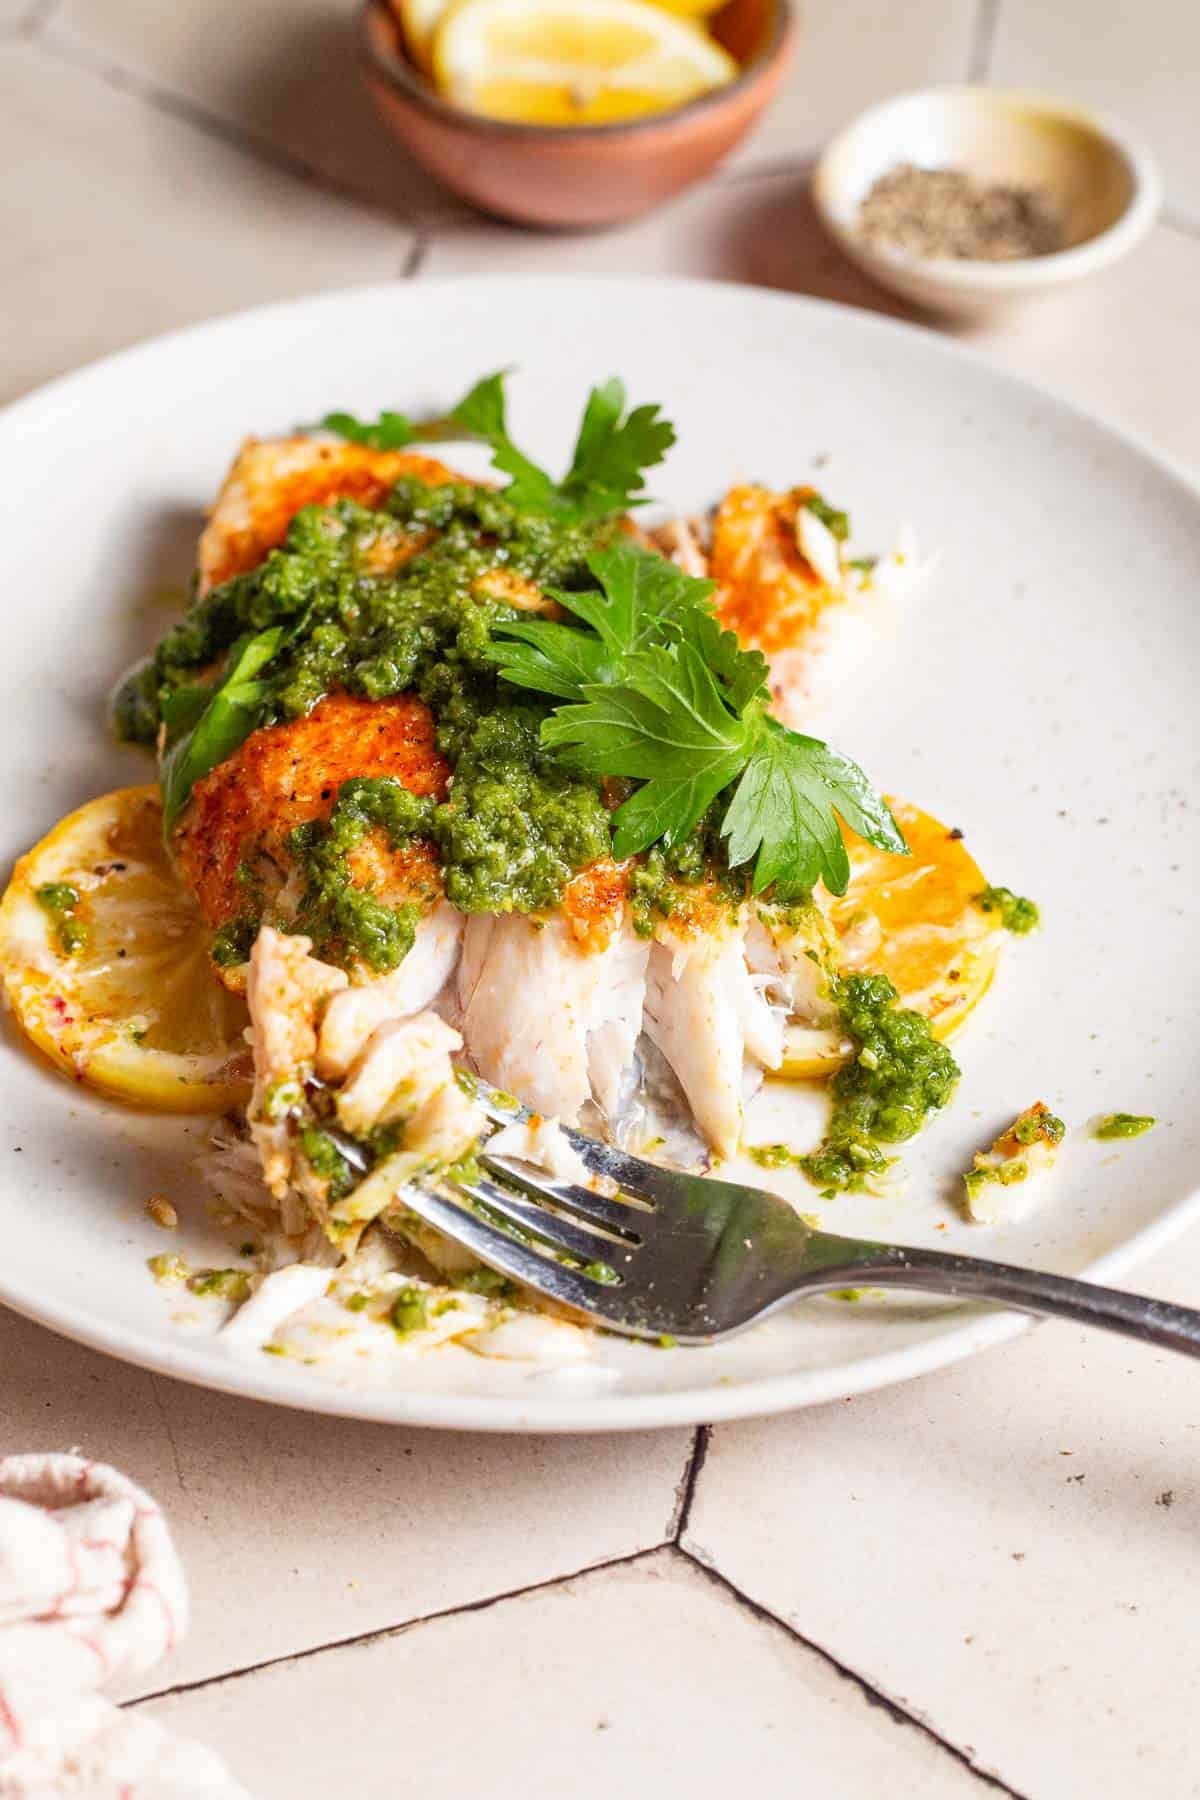 A close up of a baked snapper fillet topped with zhoug and parsley with some lemon slices on a plate with a fork. Next this is a cloth napkin, and small bowls of pepper and lemon slices.